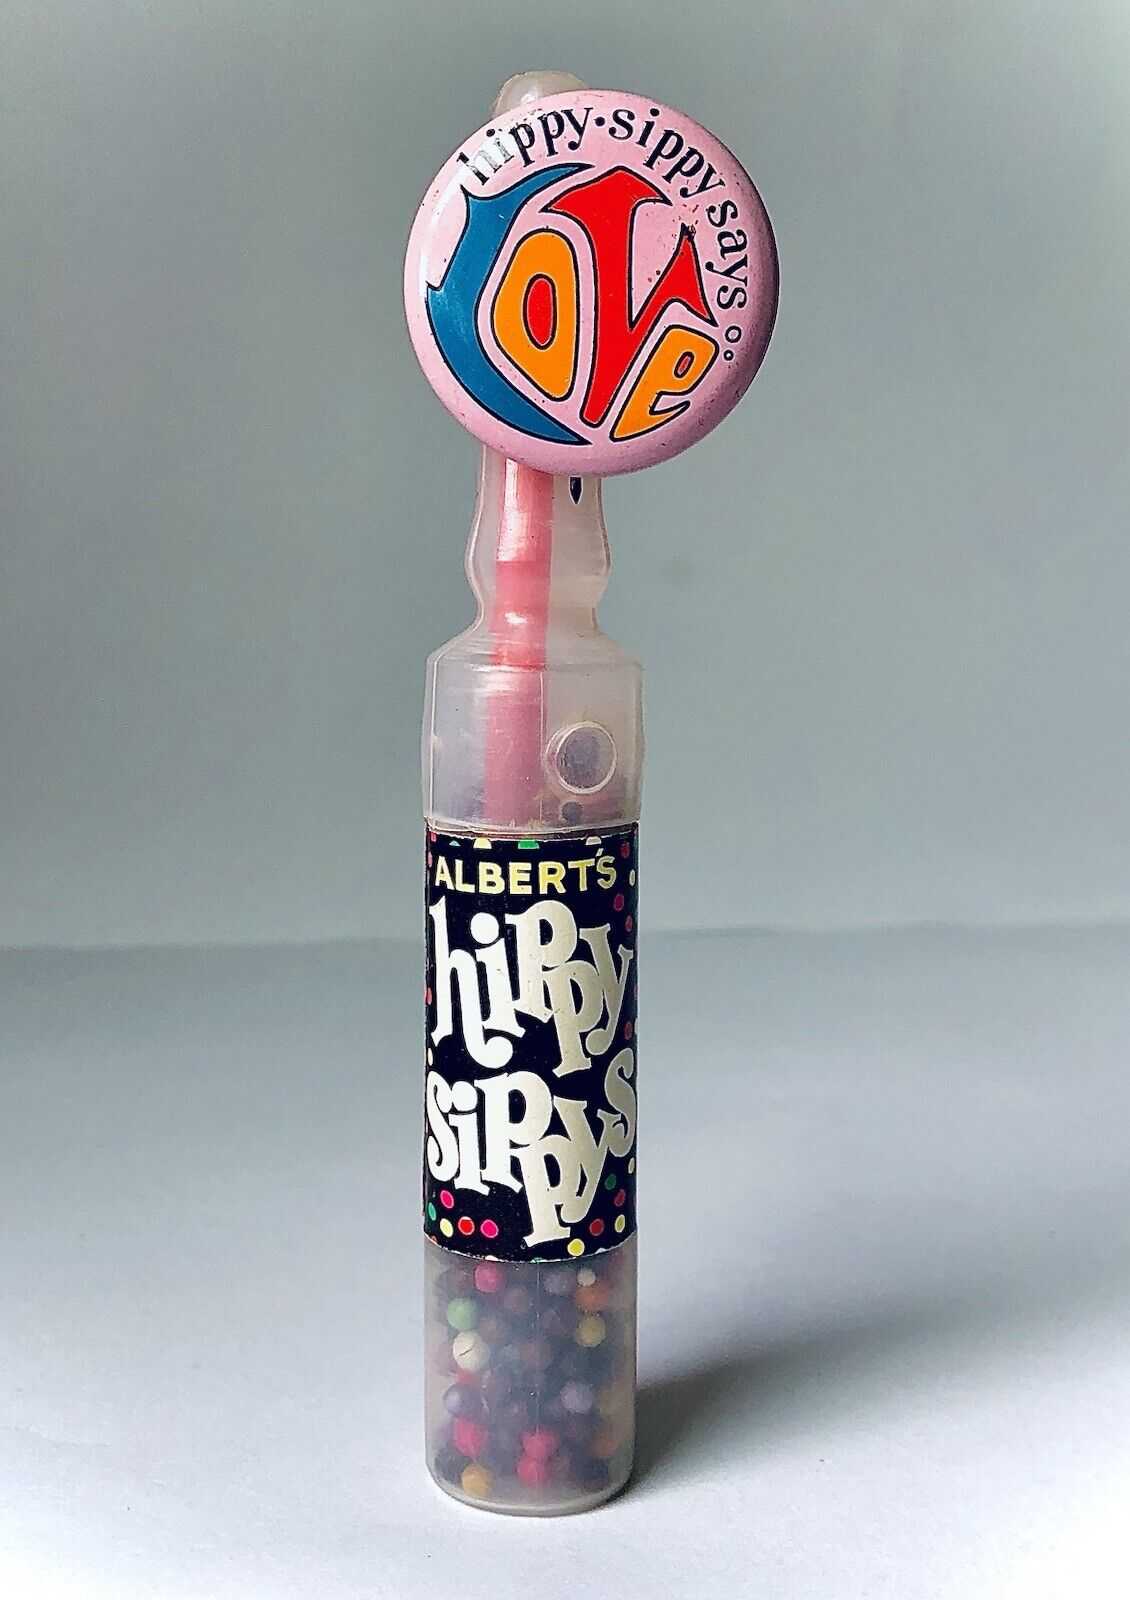 BANNED Vintage 1969 Alberts HIPPY SIPPY Candy Heroin Syringe Container WOODSTOCK